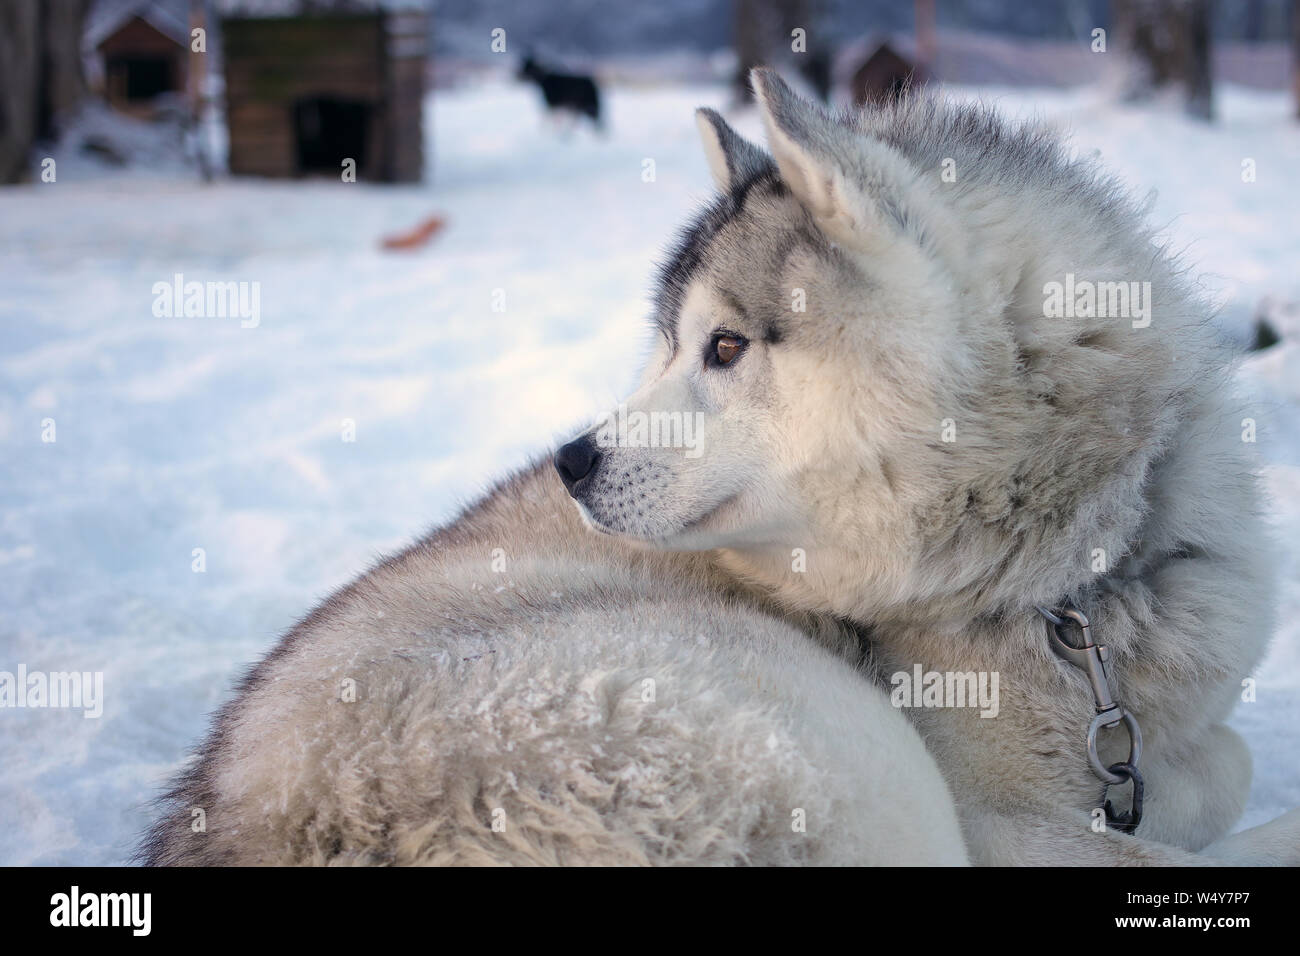 Ushuaia, Tierra del Fuego - July 19, 2019: Siberian Husky dog portrait on the snow in the Cotorras Winter Center in Ushuaia, Argentina Stock Photo